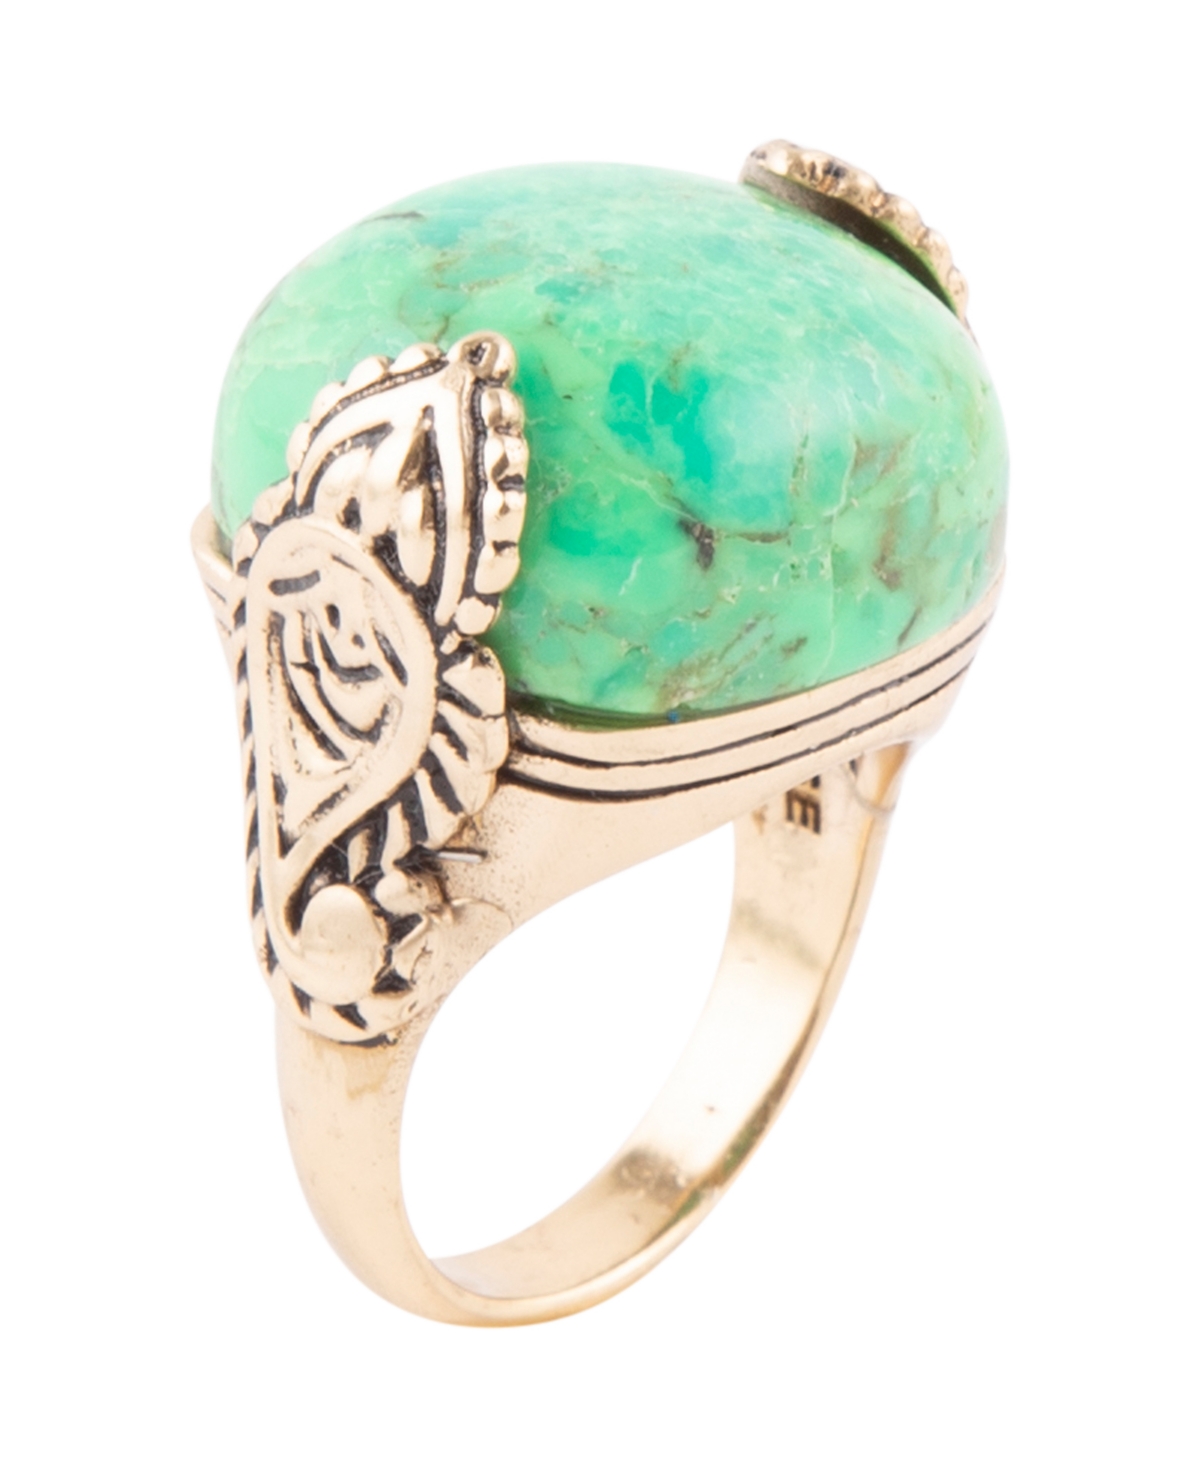 Barse Ornate Bronze and Genuine Lime Turquoise Rings